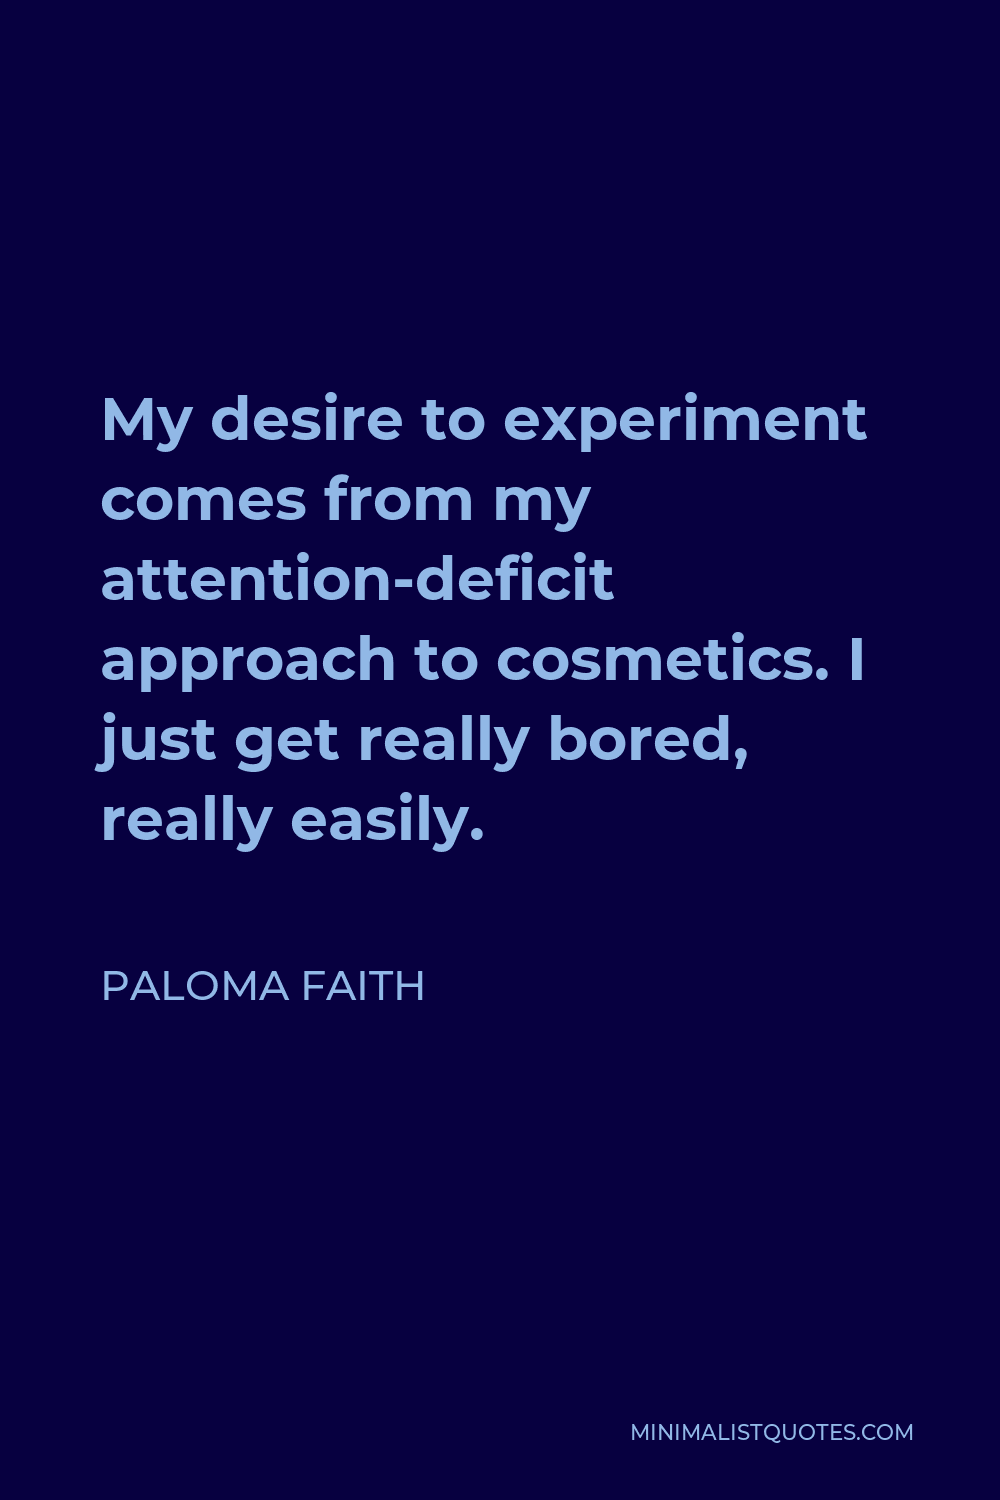 Paloma Faith Quote - My desire to experiment comes from my attention-deficit approach to cosmetics. I just get really bored, really easily.